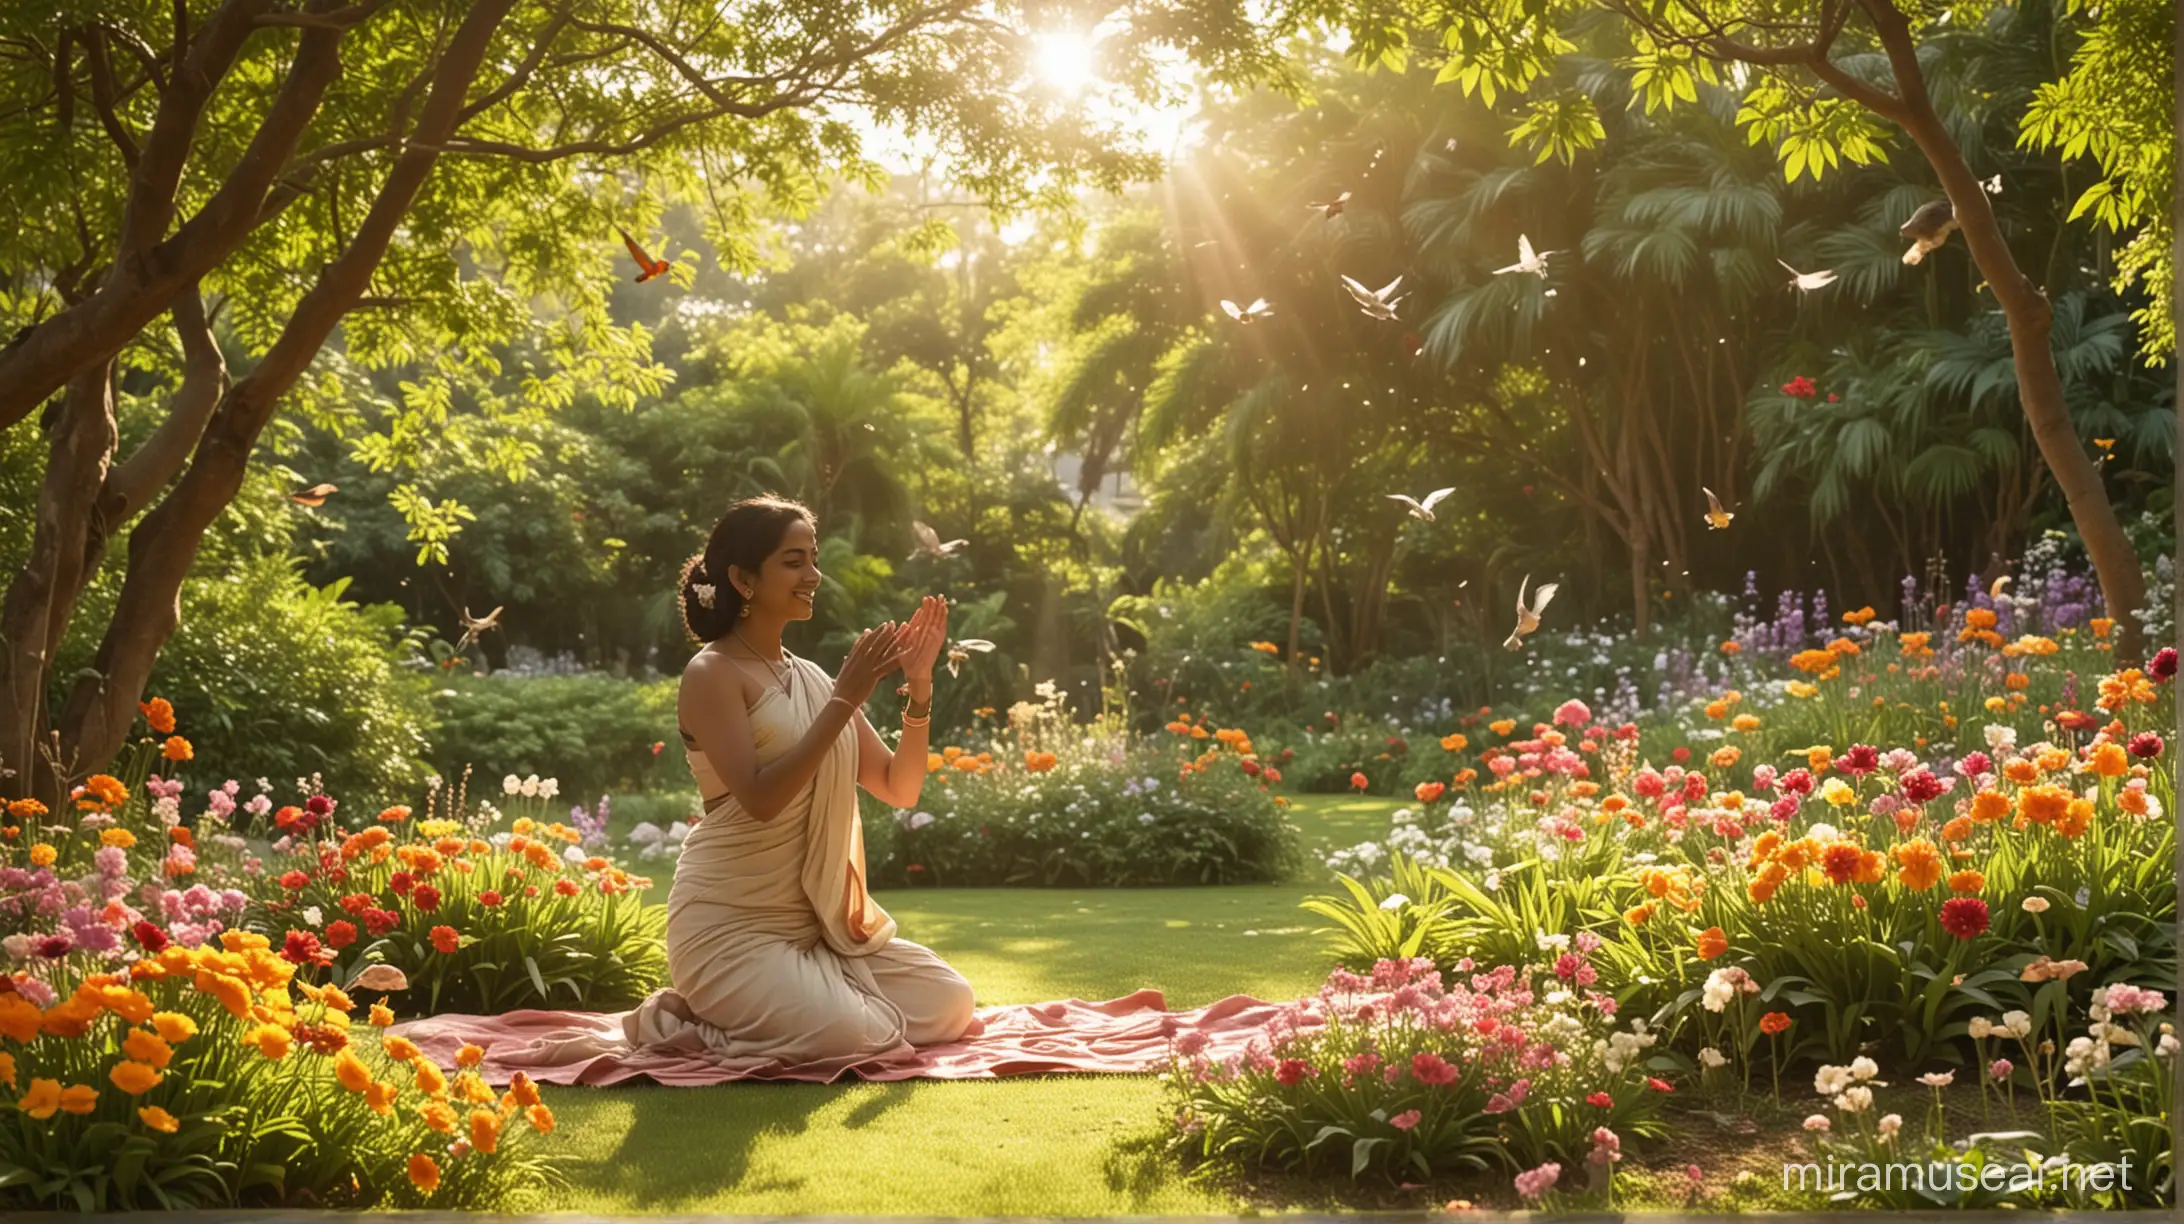 Nadi shodhan Pranayam being performed in a lush, sunlit garden, with colorful flowers in bloom, birds chirping in the background, and a gentle breeze swaying the leaves, evoking a sense of harmony and rejuvenation